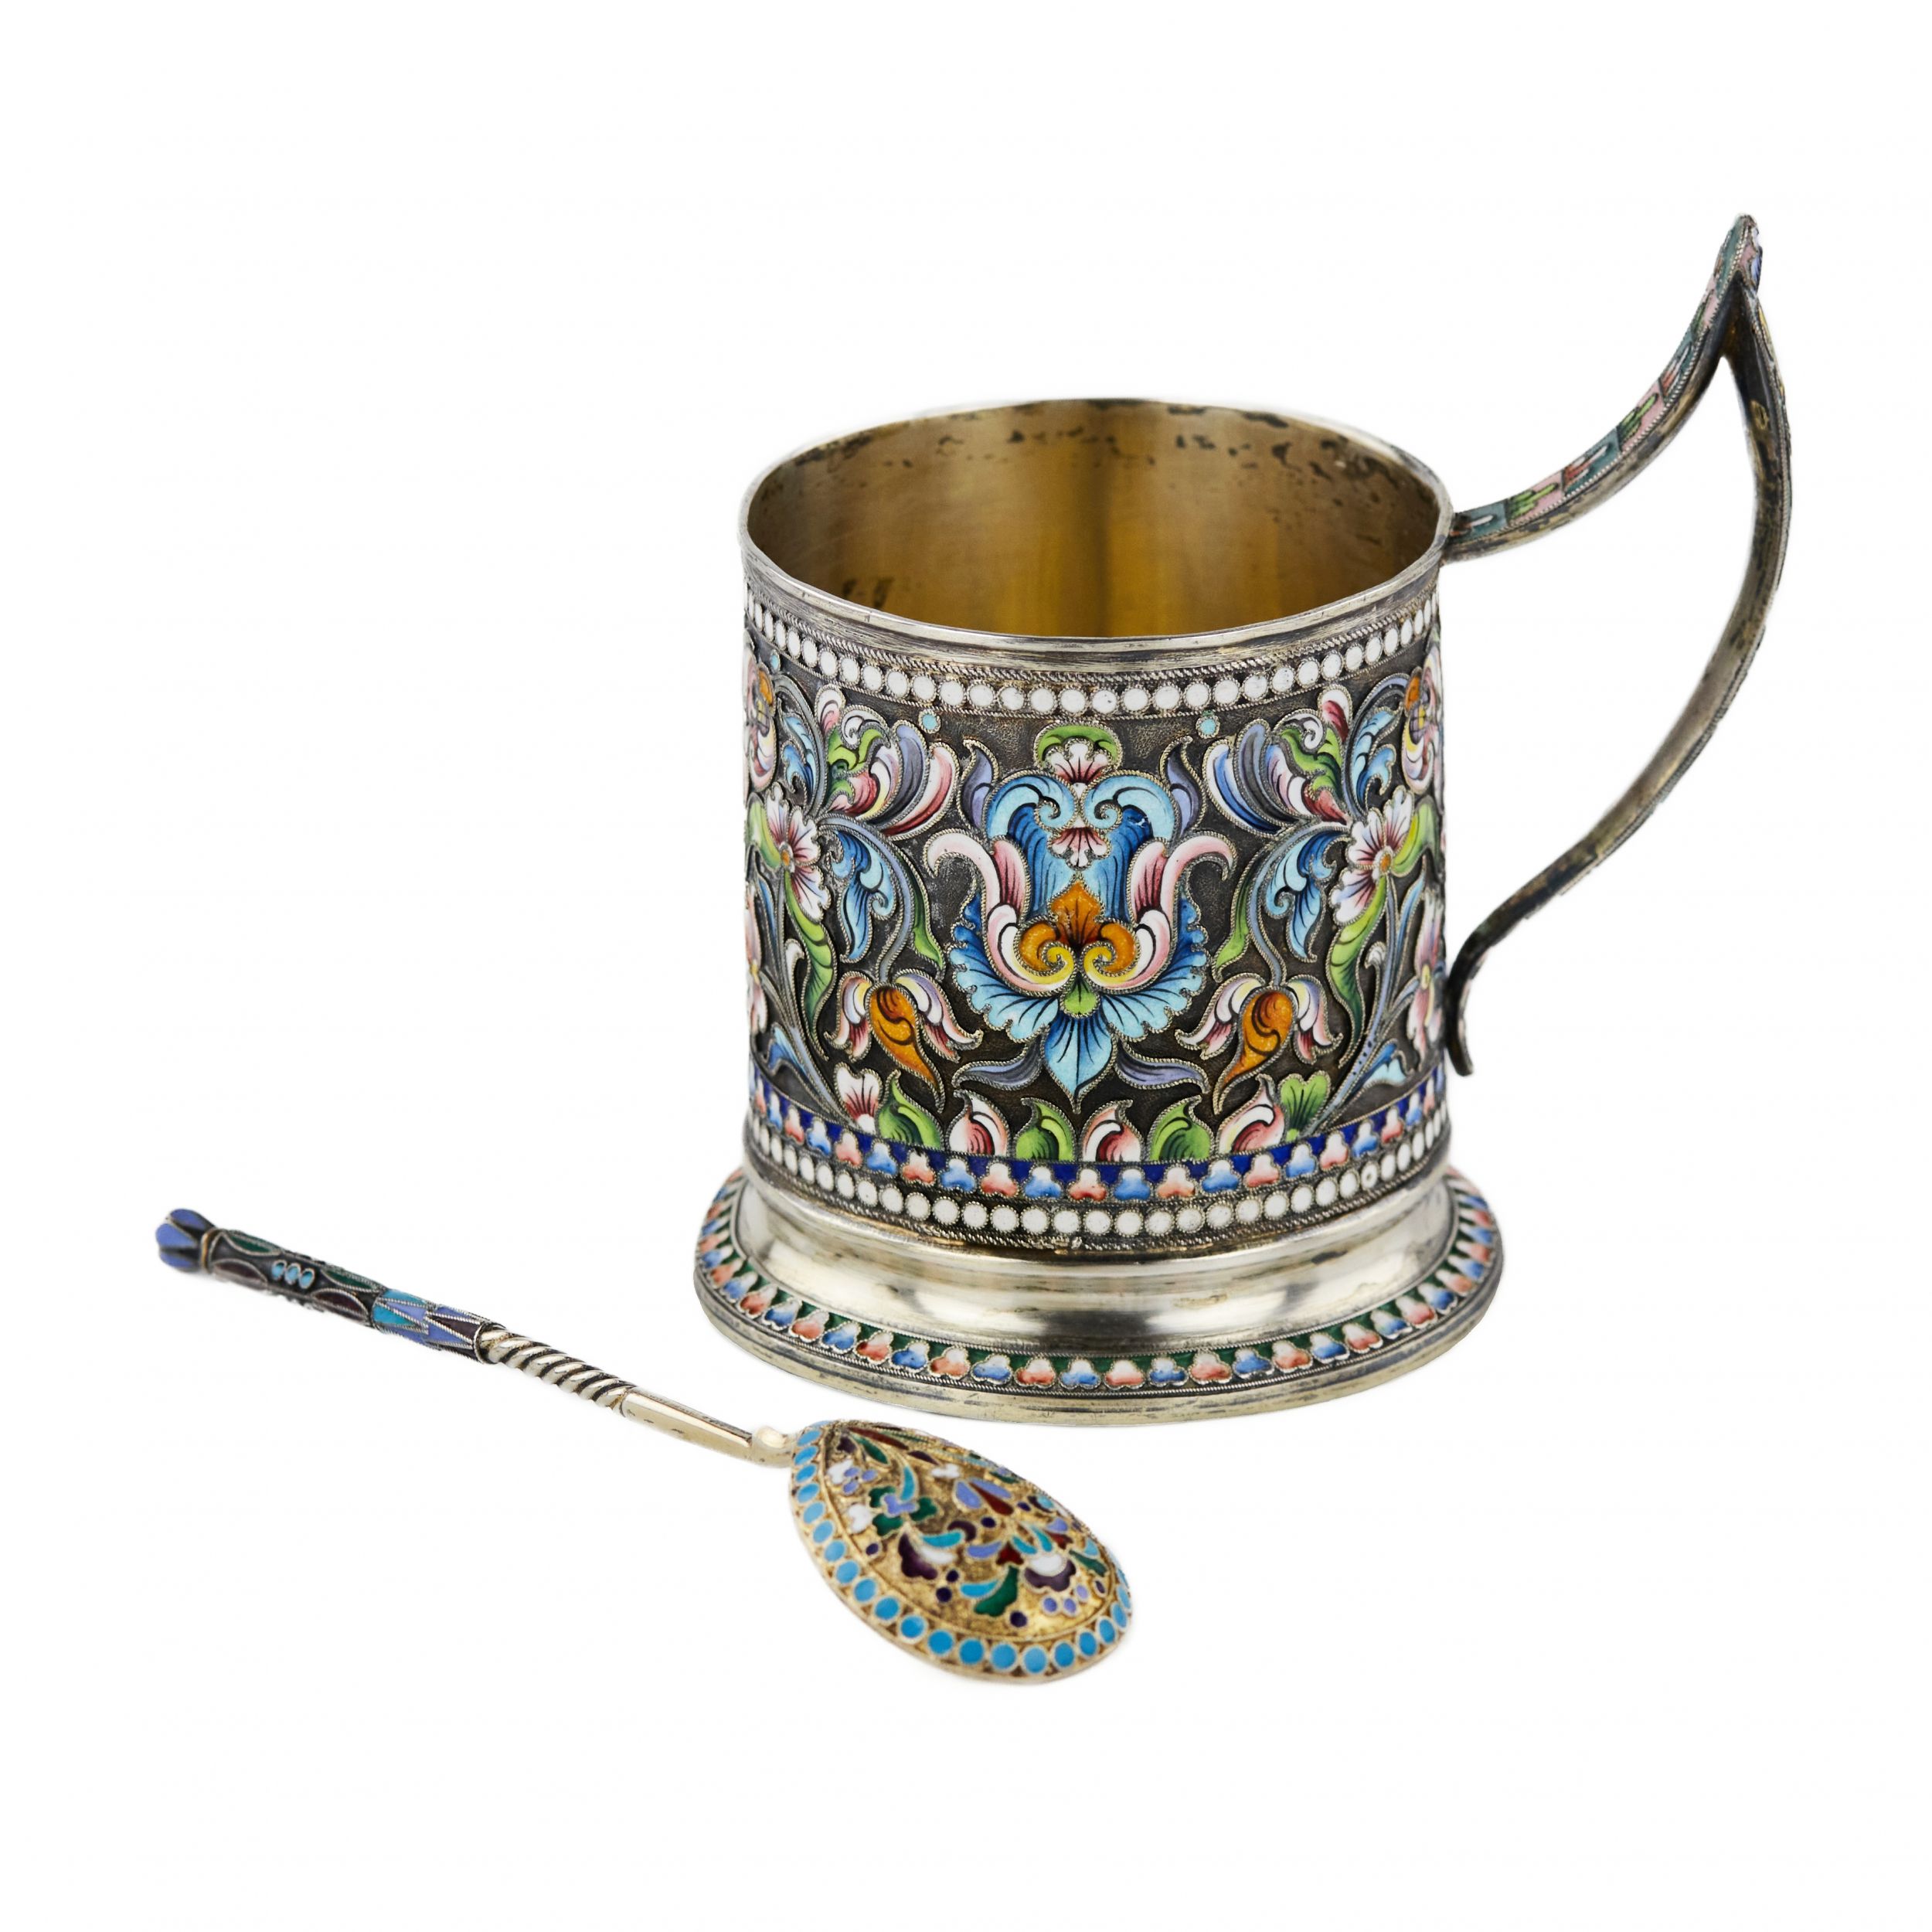 Silver-coaster-with-a-spoon-decorated-with-cloisonné-enamel-Moscow-1908-17